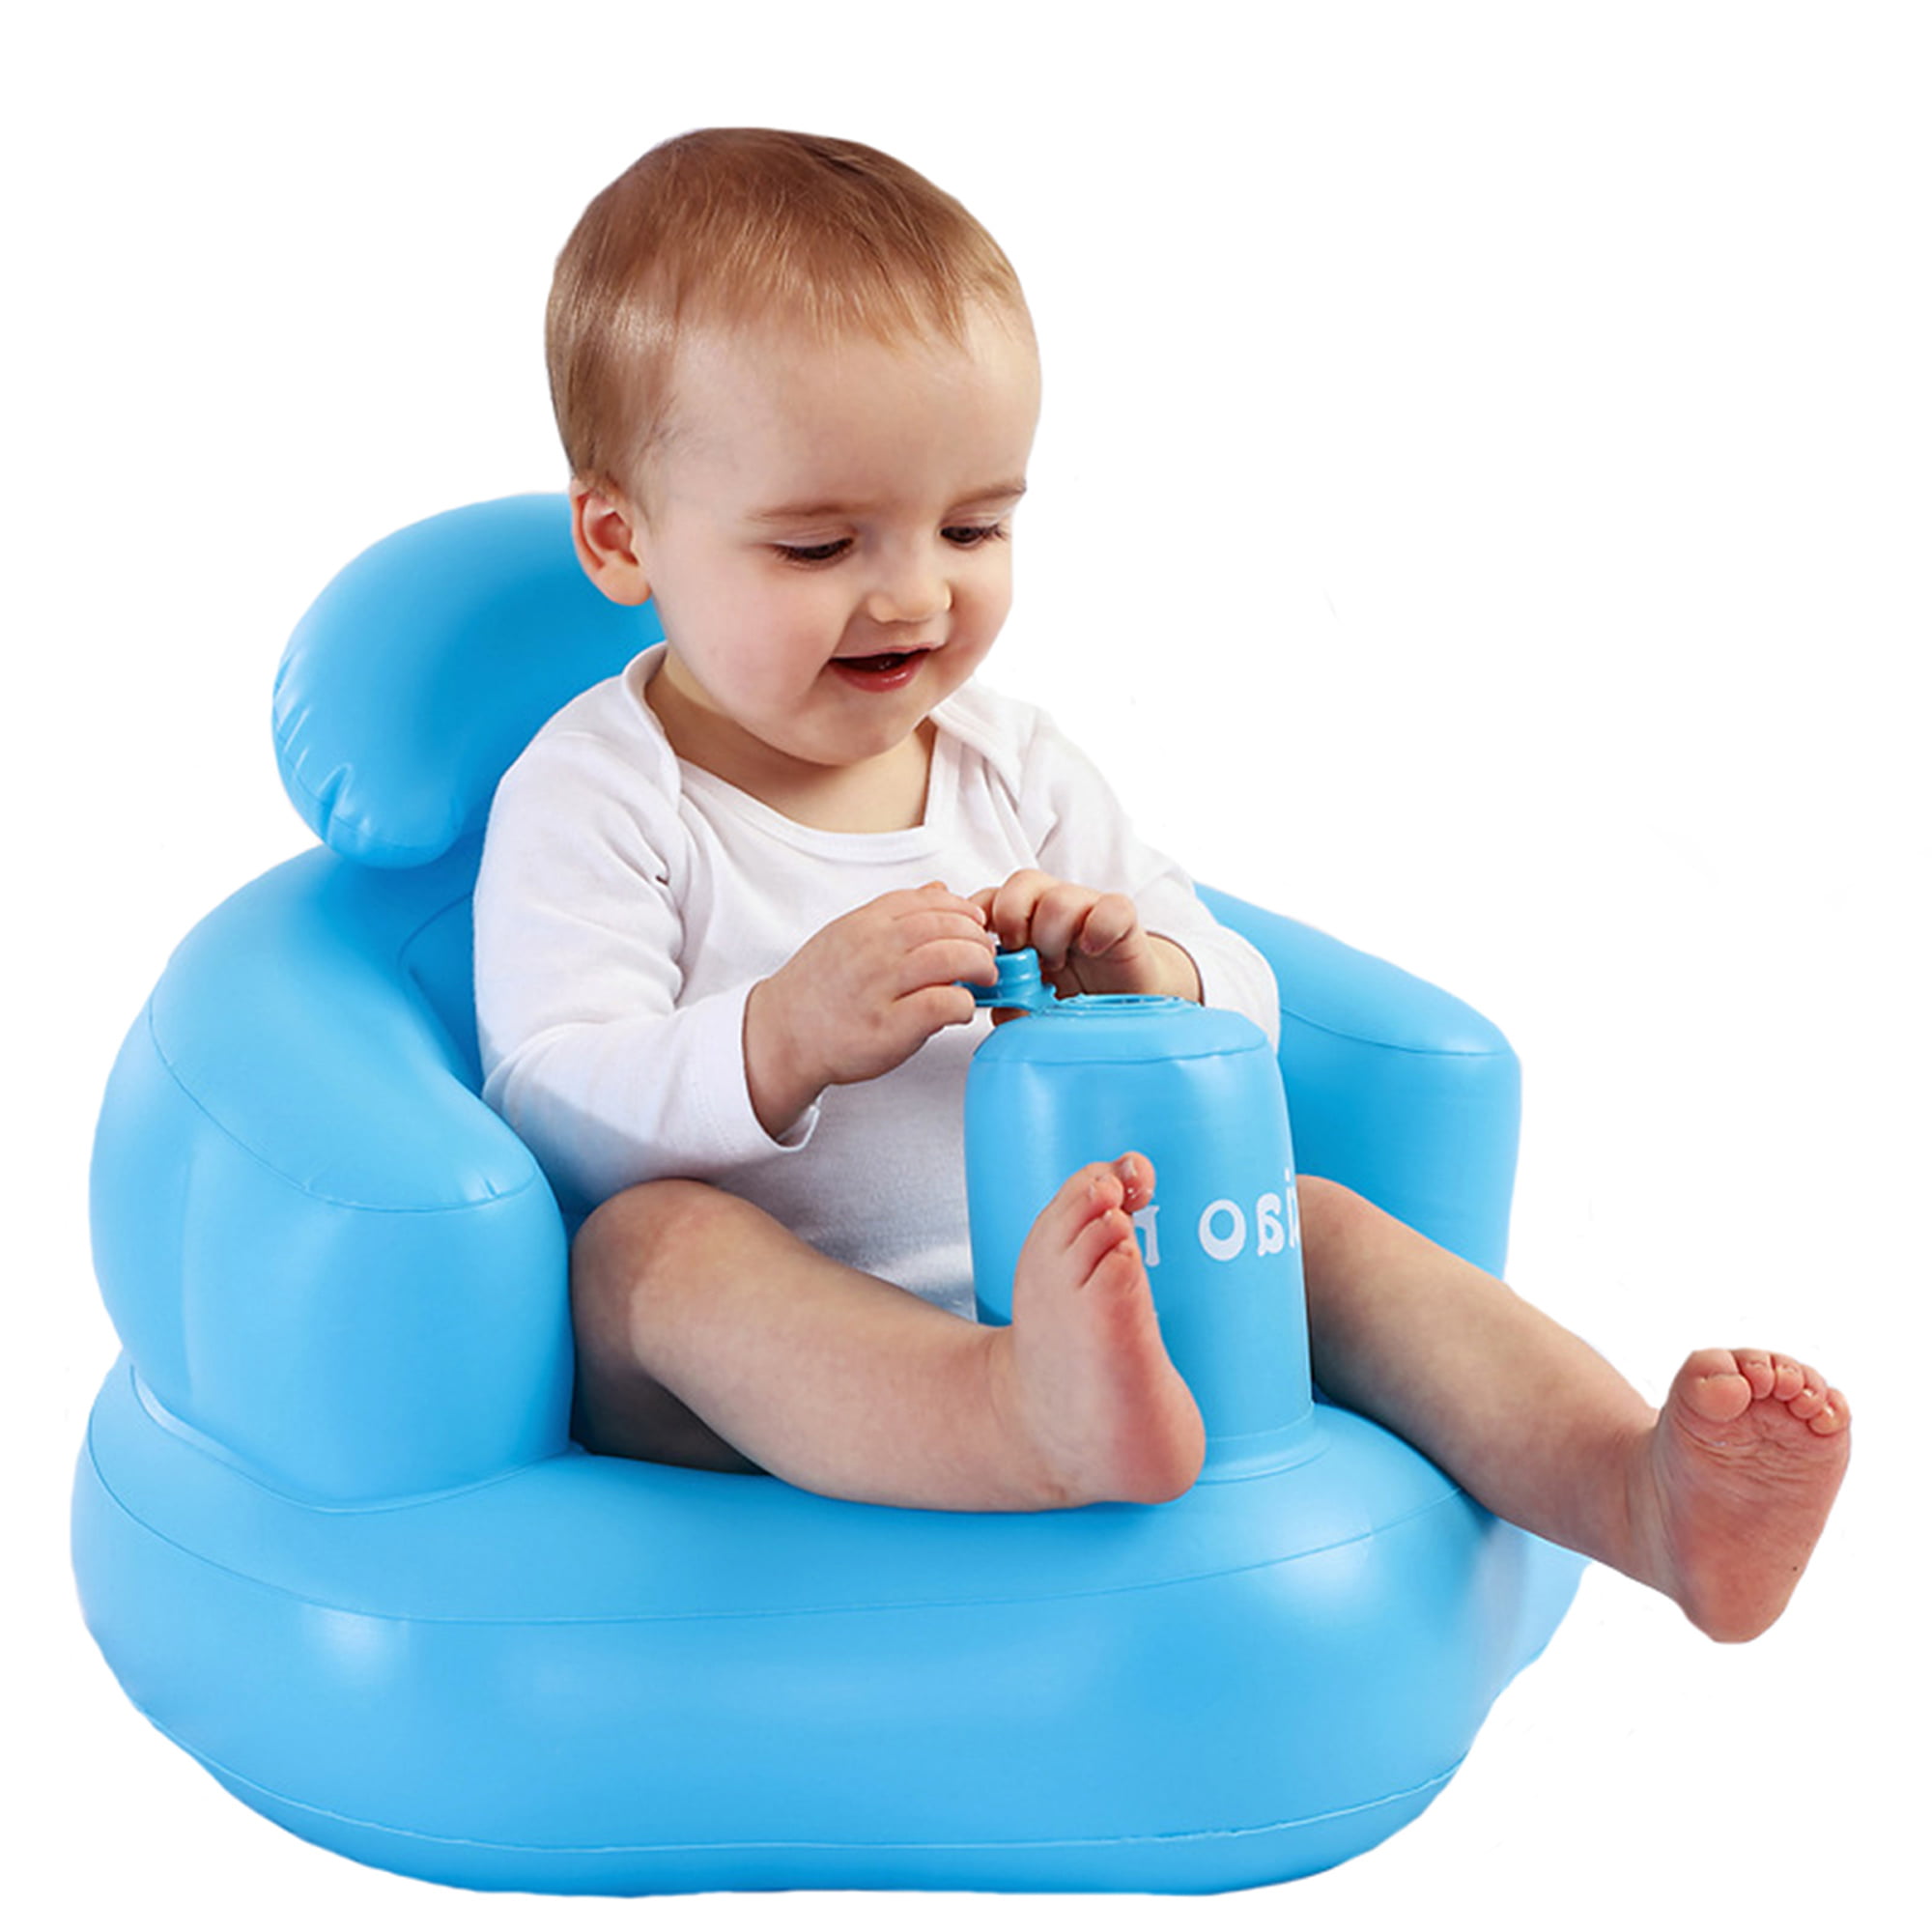 Baby Sofa Inflatable Kid Infant Toddlers Learn stool Chair Training Bath Seat LJ 